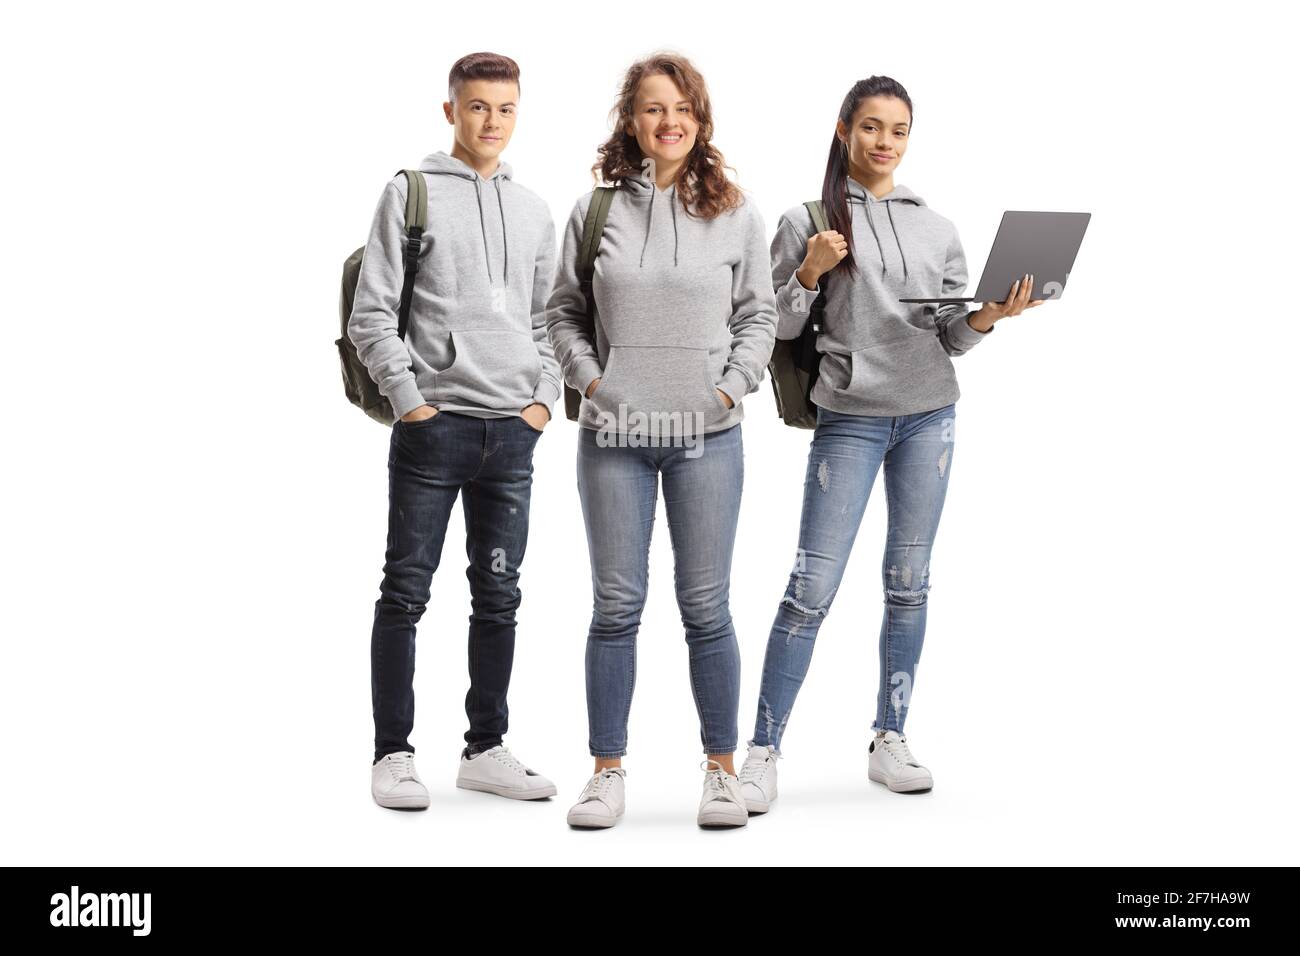 College students with backpacks and a laptop isolated on white background Stock Photo